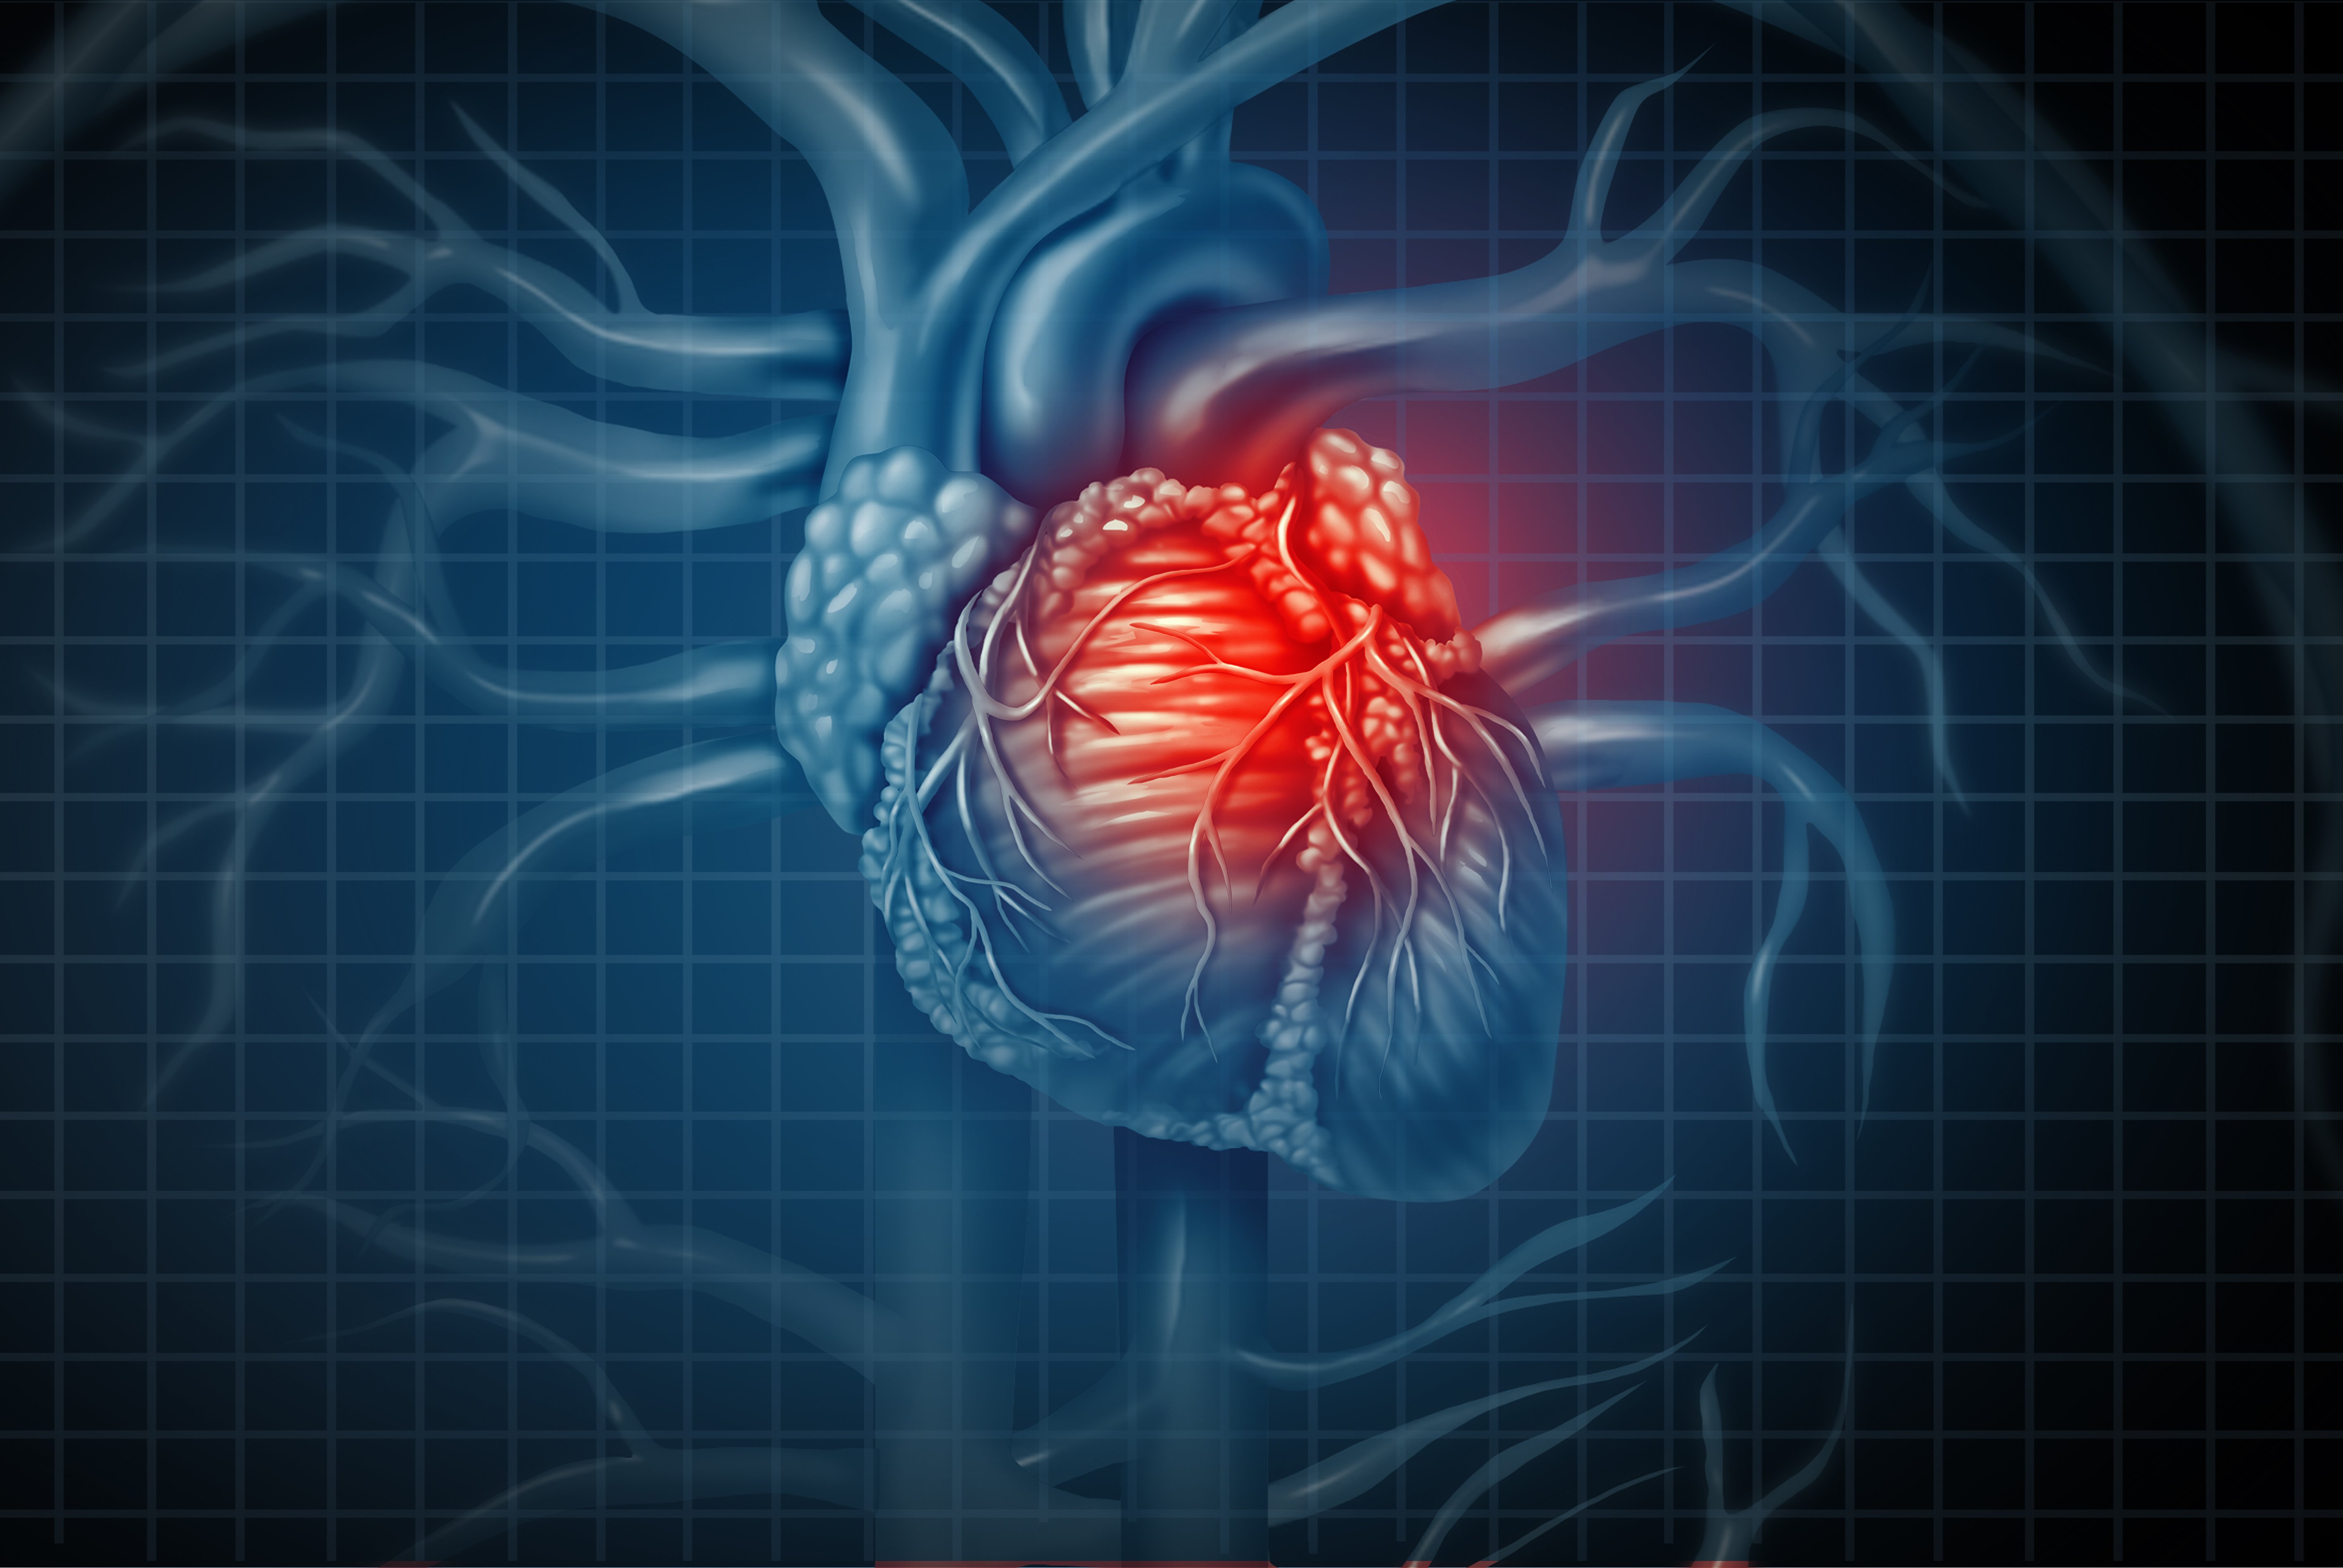 Critical Care Alert: Coronary Angiography after Cardiac Arrest without